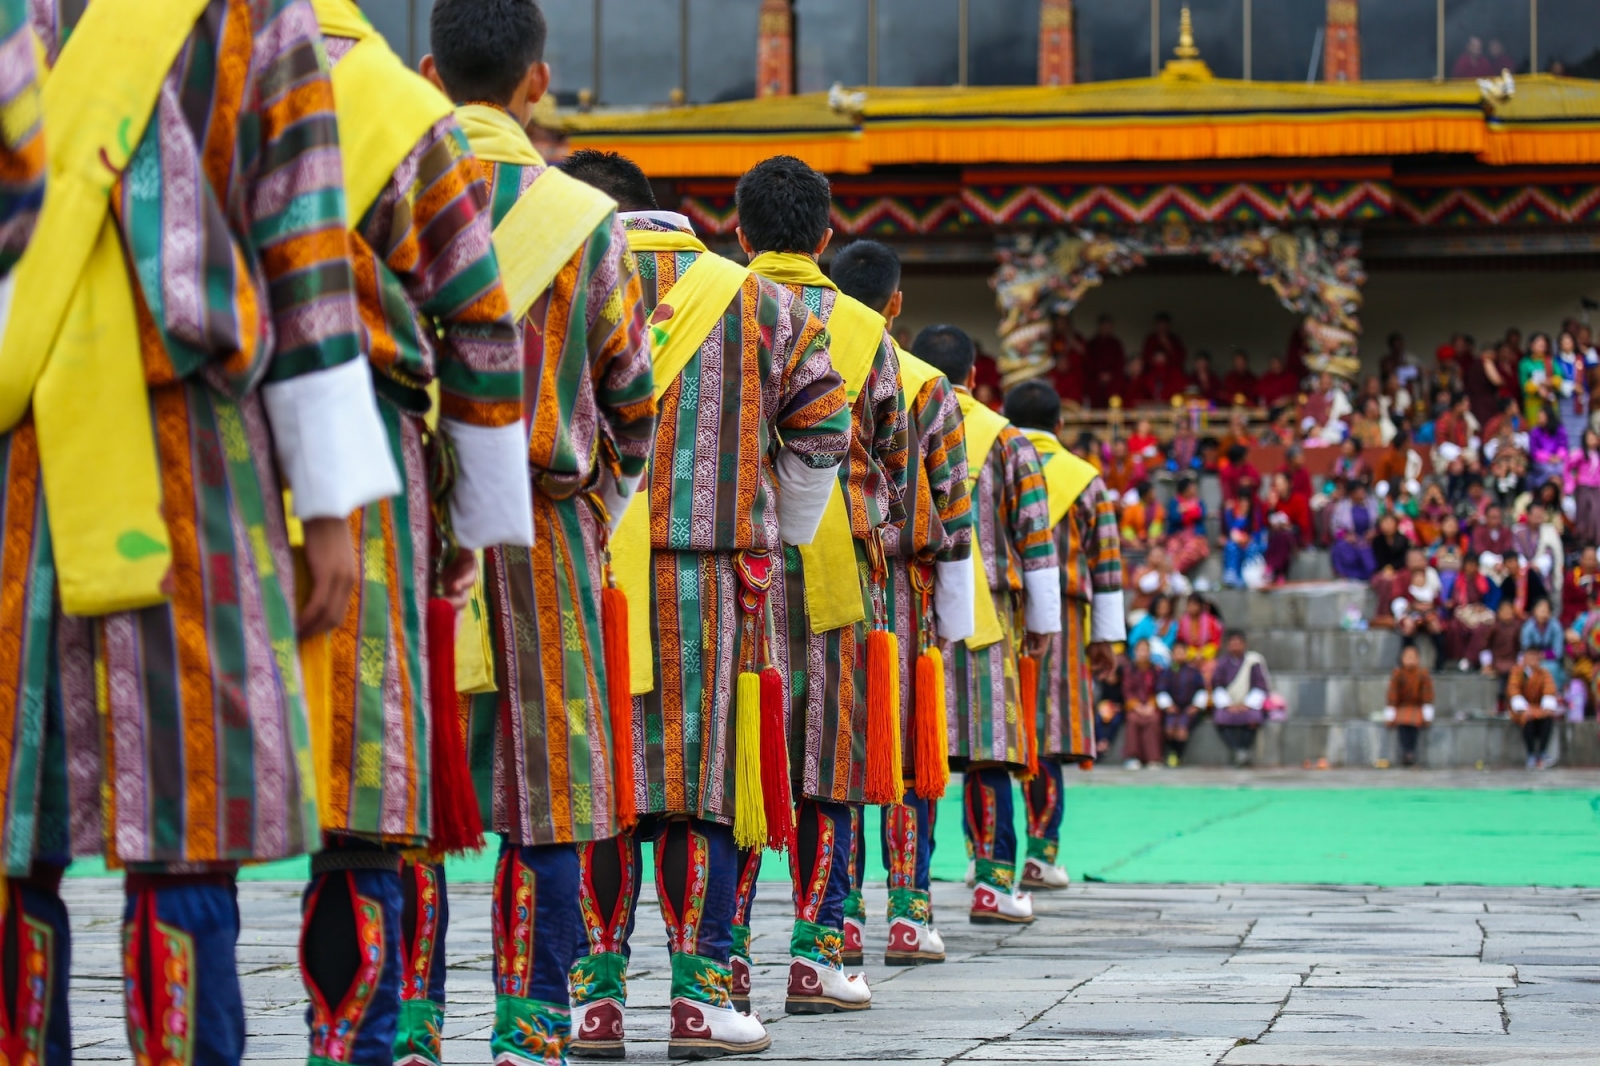 A group of male dancers get ready for a traditional performance during Thimphu Tshechu (festival).